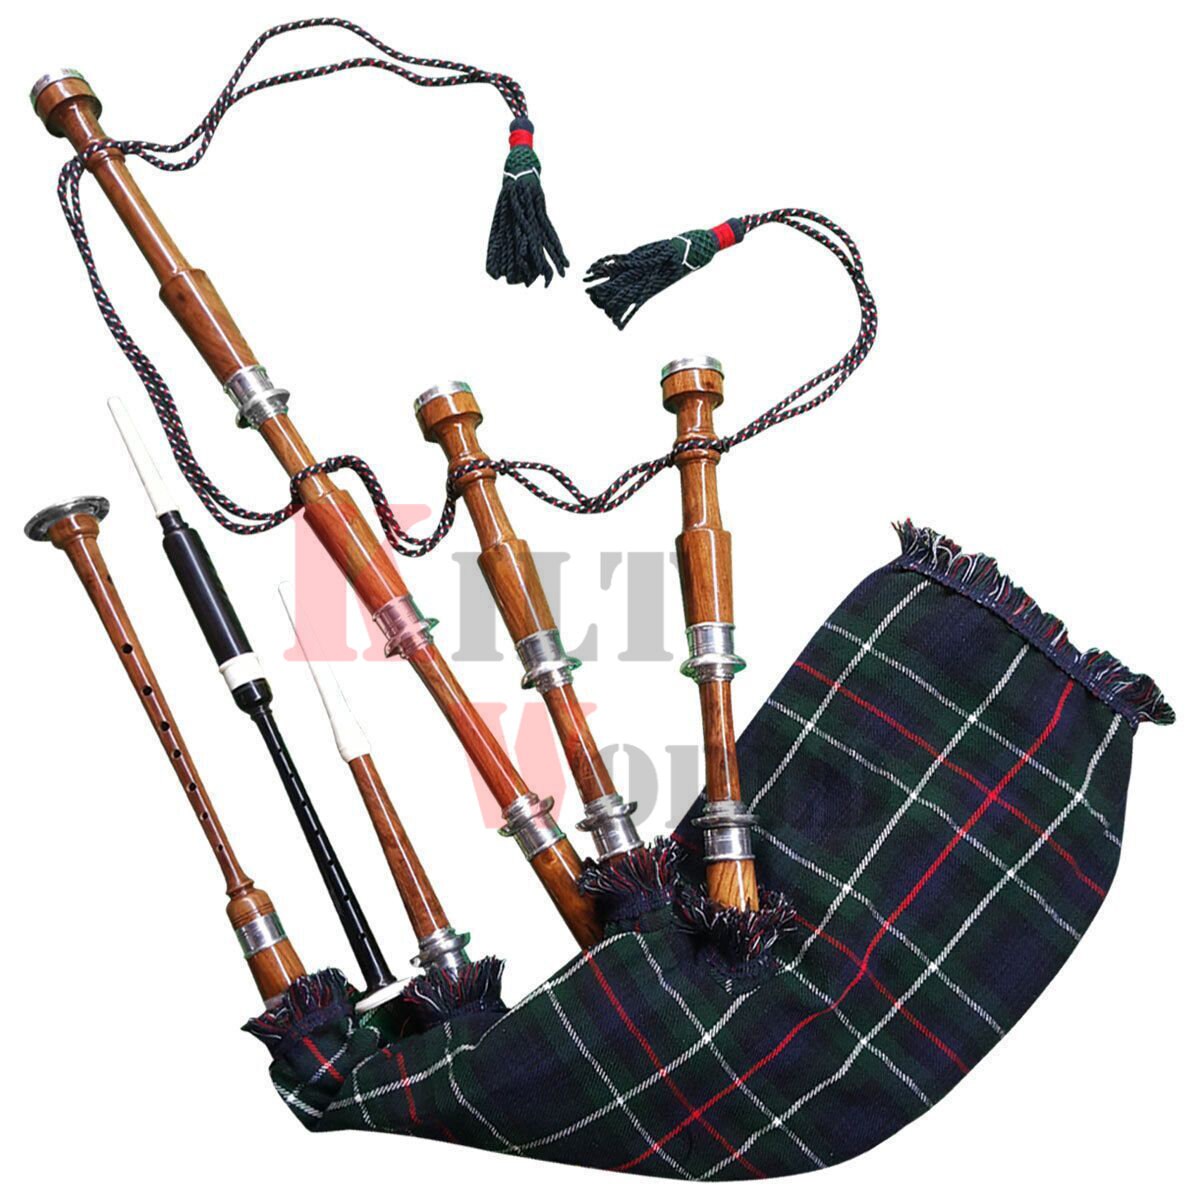 Full size Rosewood Bagpipe Mackenzie Silver Plain Mounts Natural Color Scottish Highland Bagpipes with accessories 